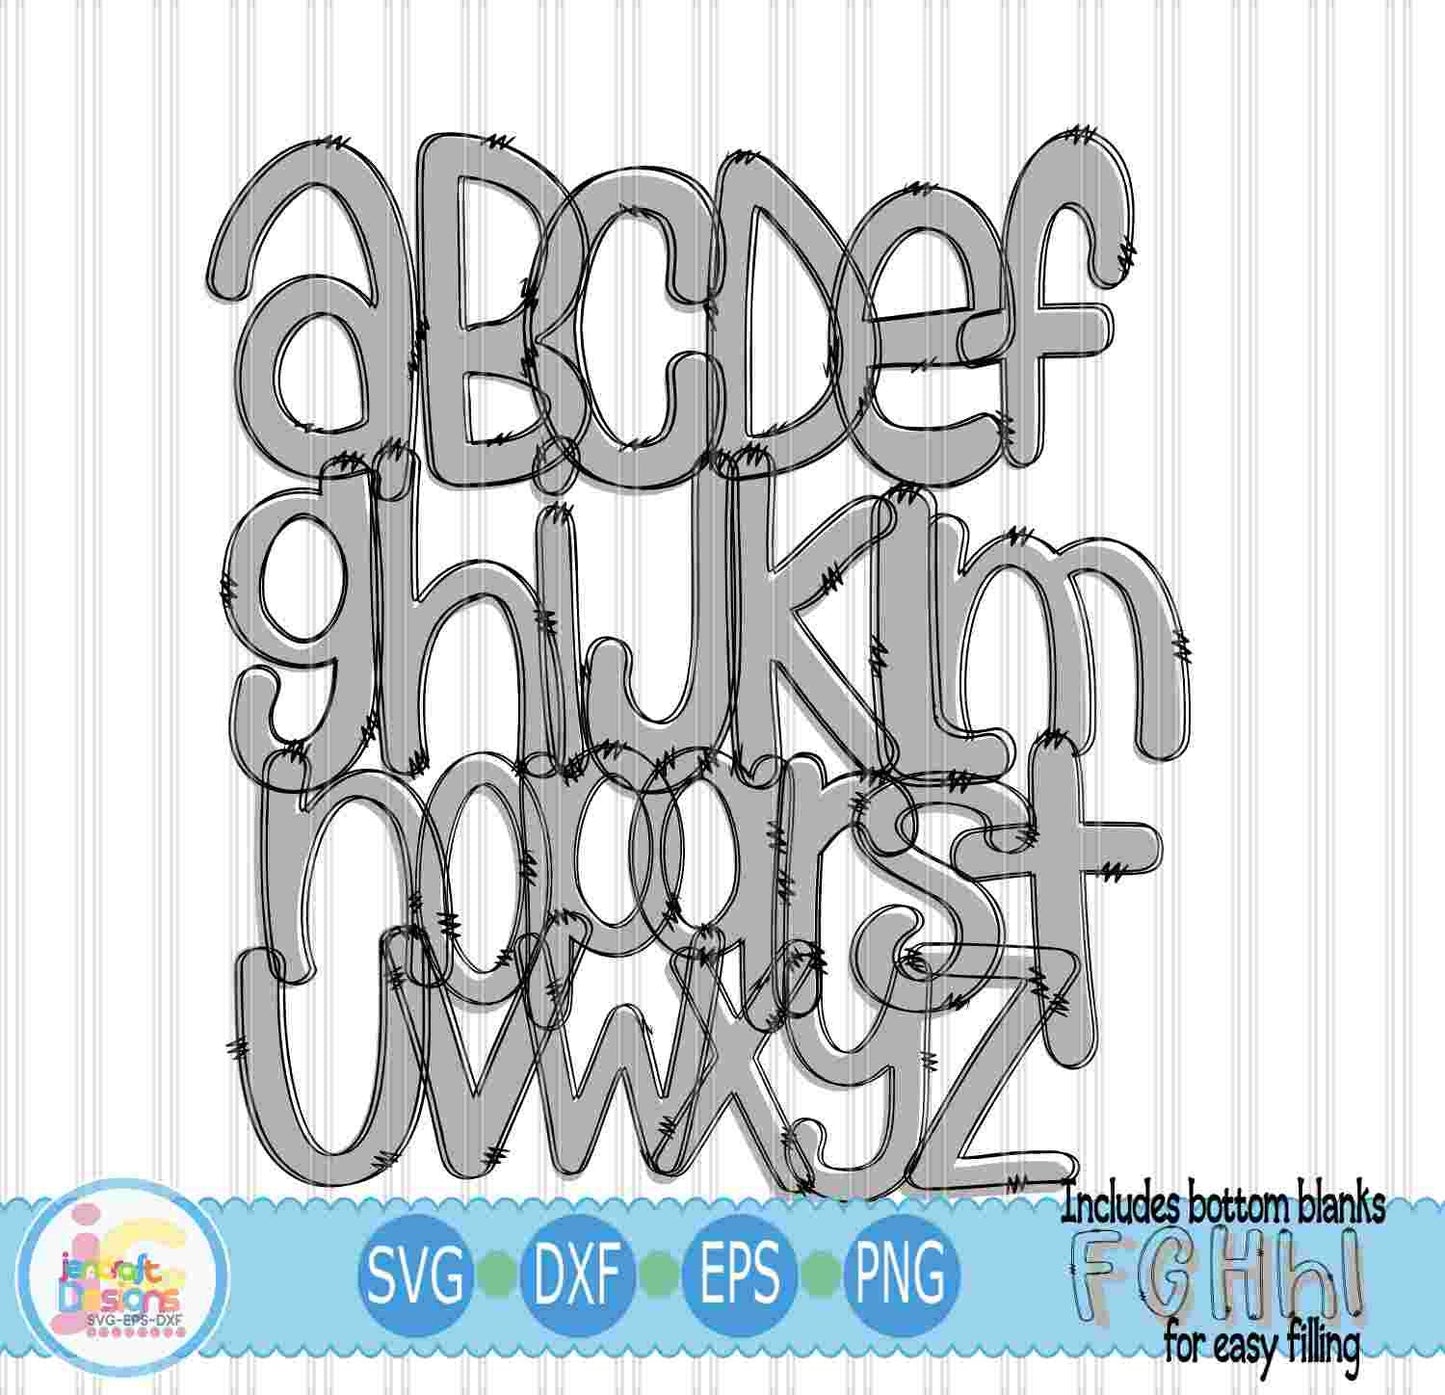 Blank Doodle Letters Alphabet Lower Png Print File for Sublimation or Printing - JenCraft Designs